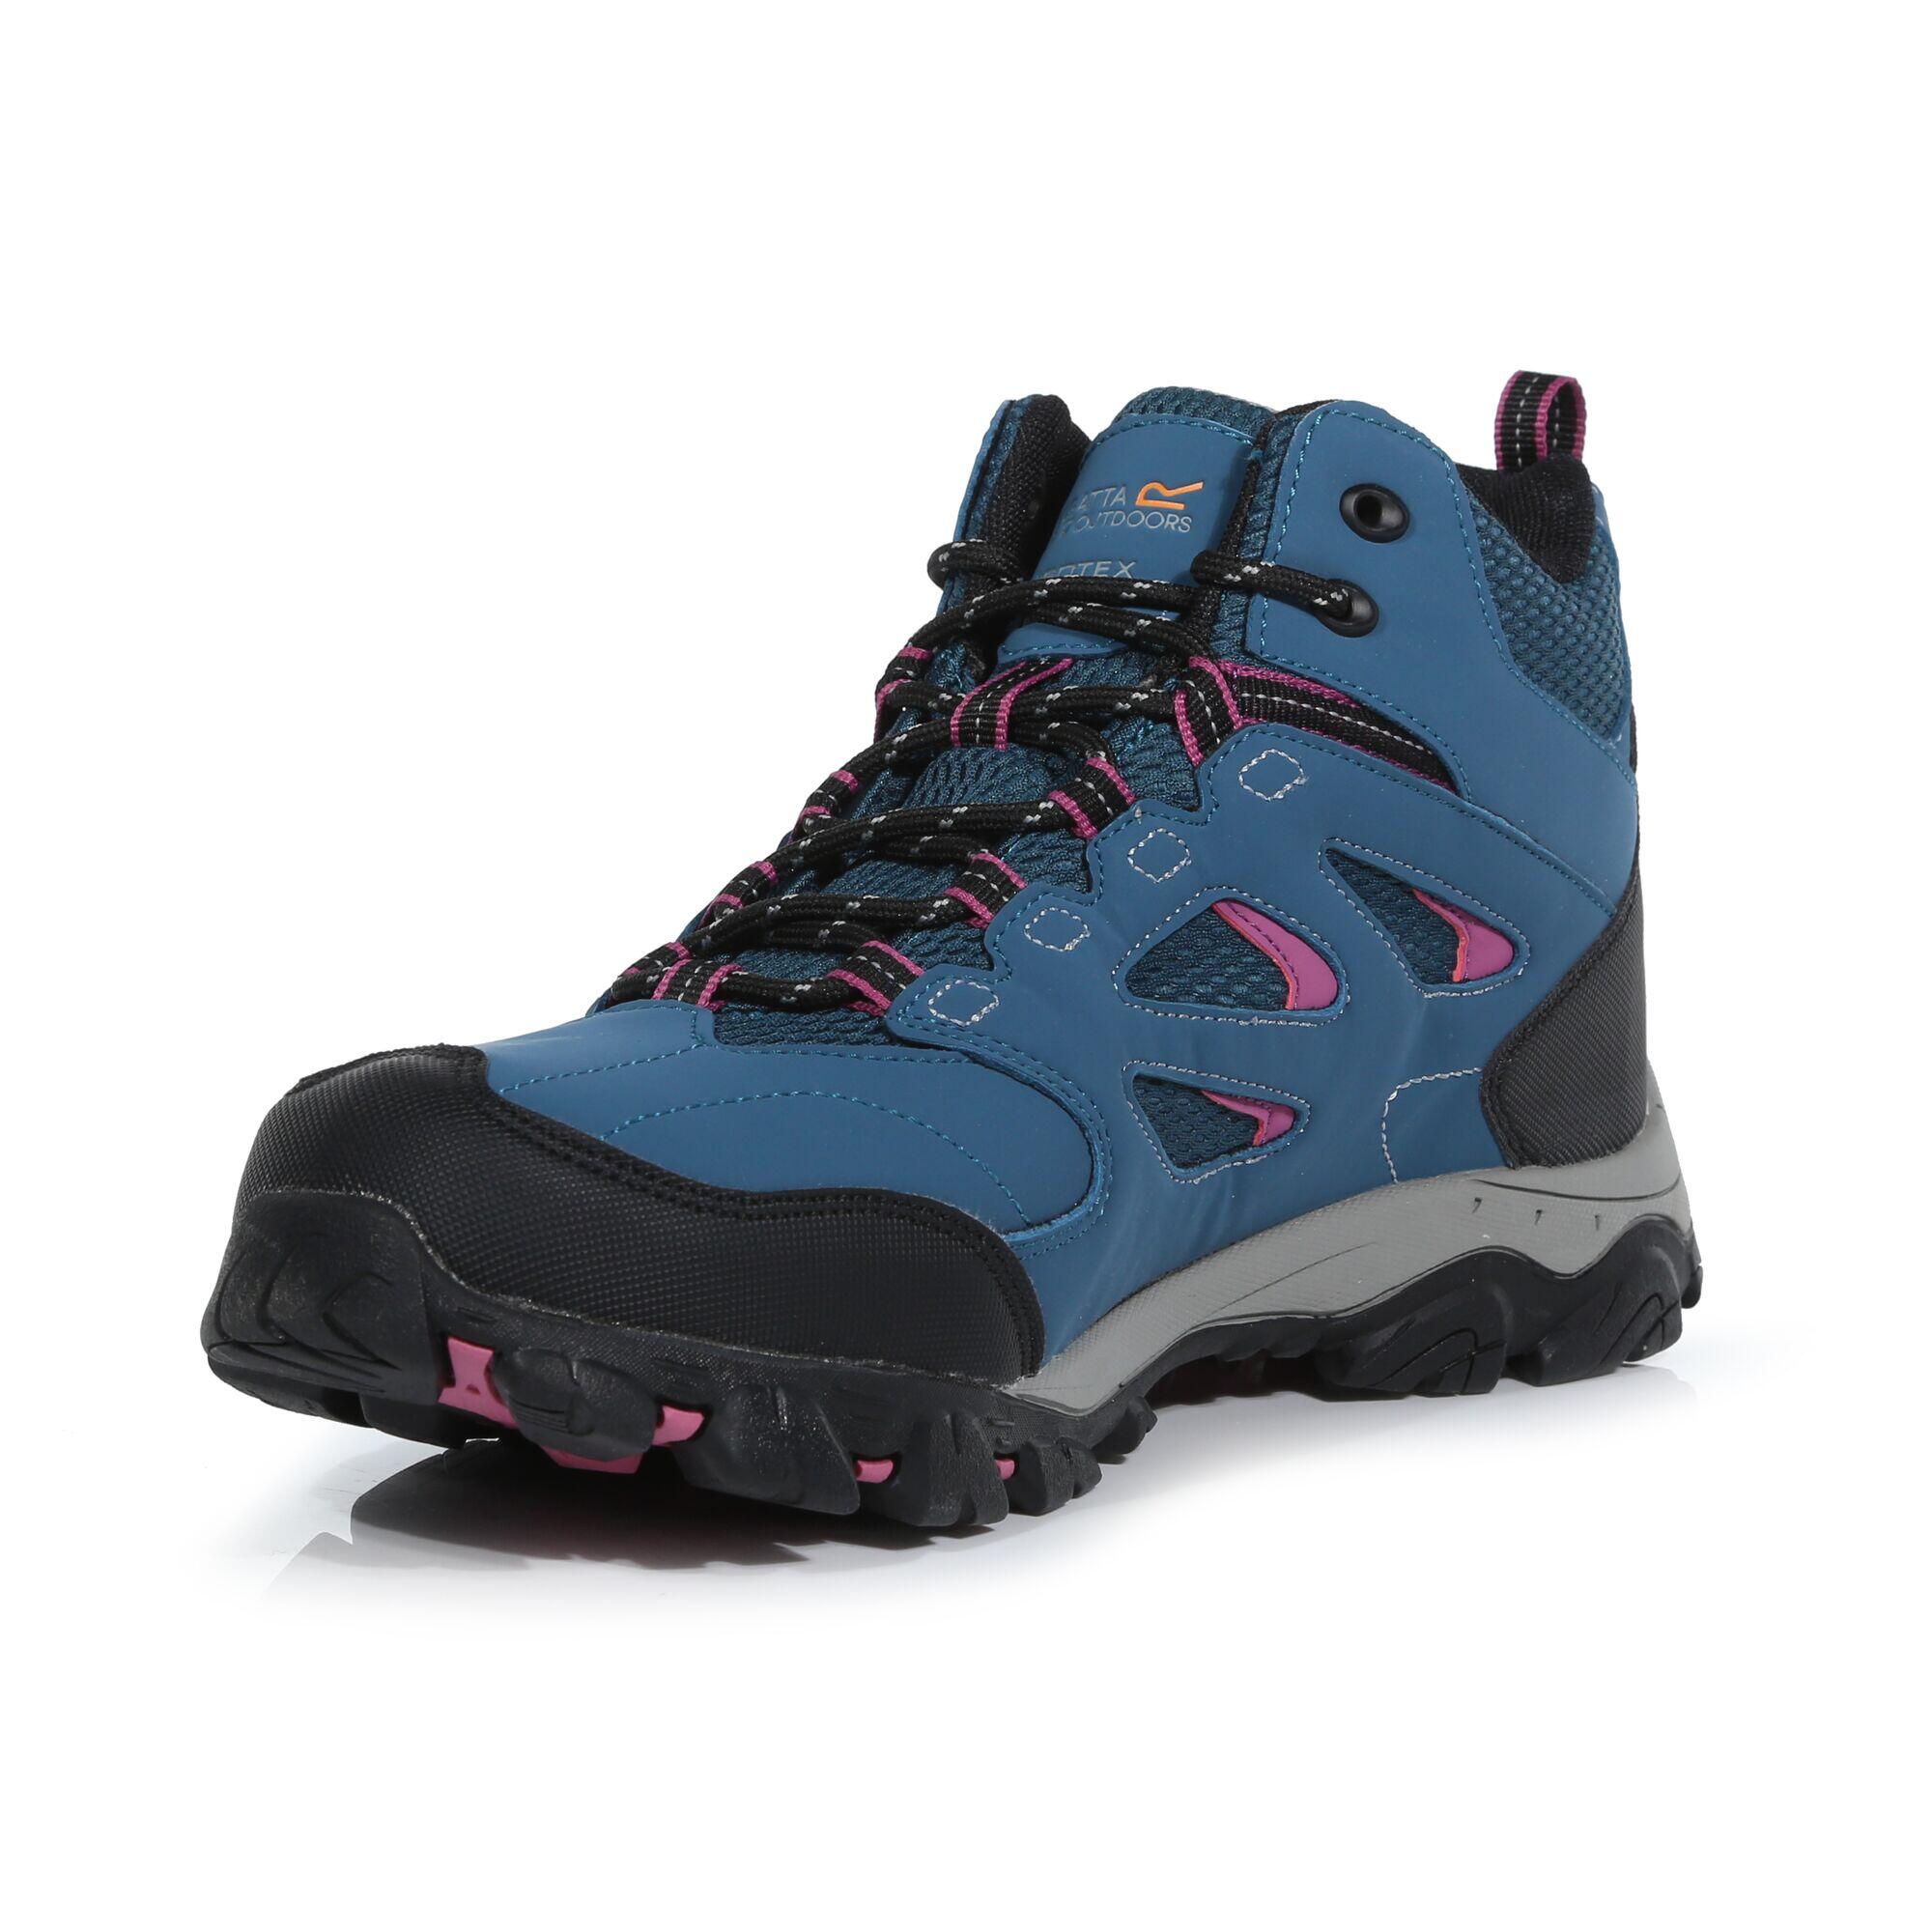 Lady Holcombe IEP Mid Women's Hiking Boots - Moroccan Blue / Red 3/5